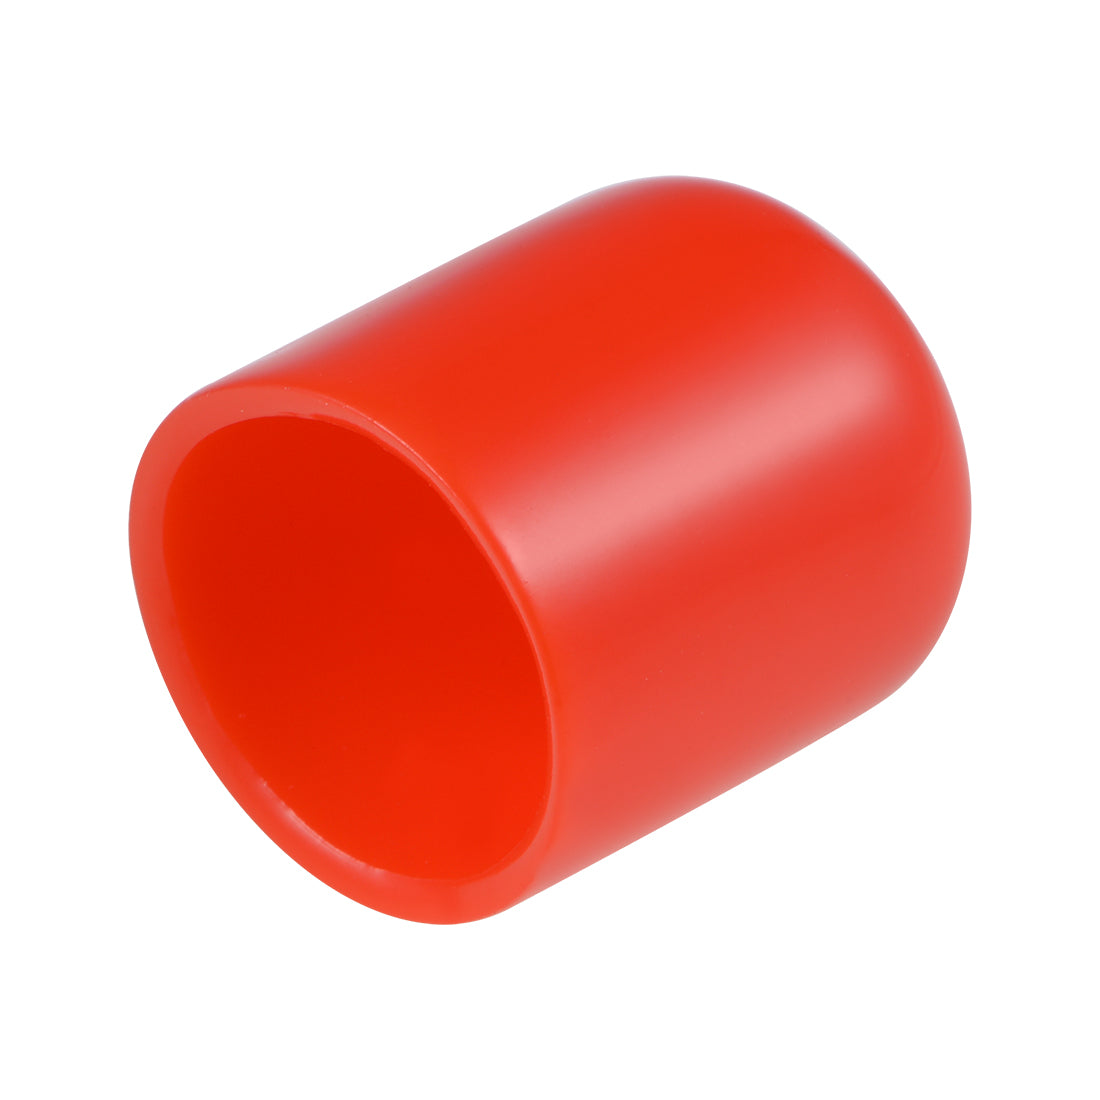 uxcell Uxcell Screw Thread Protector, 18mm ID Round End Cap Cover Red Tube Caps 10pcs